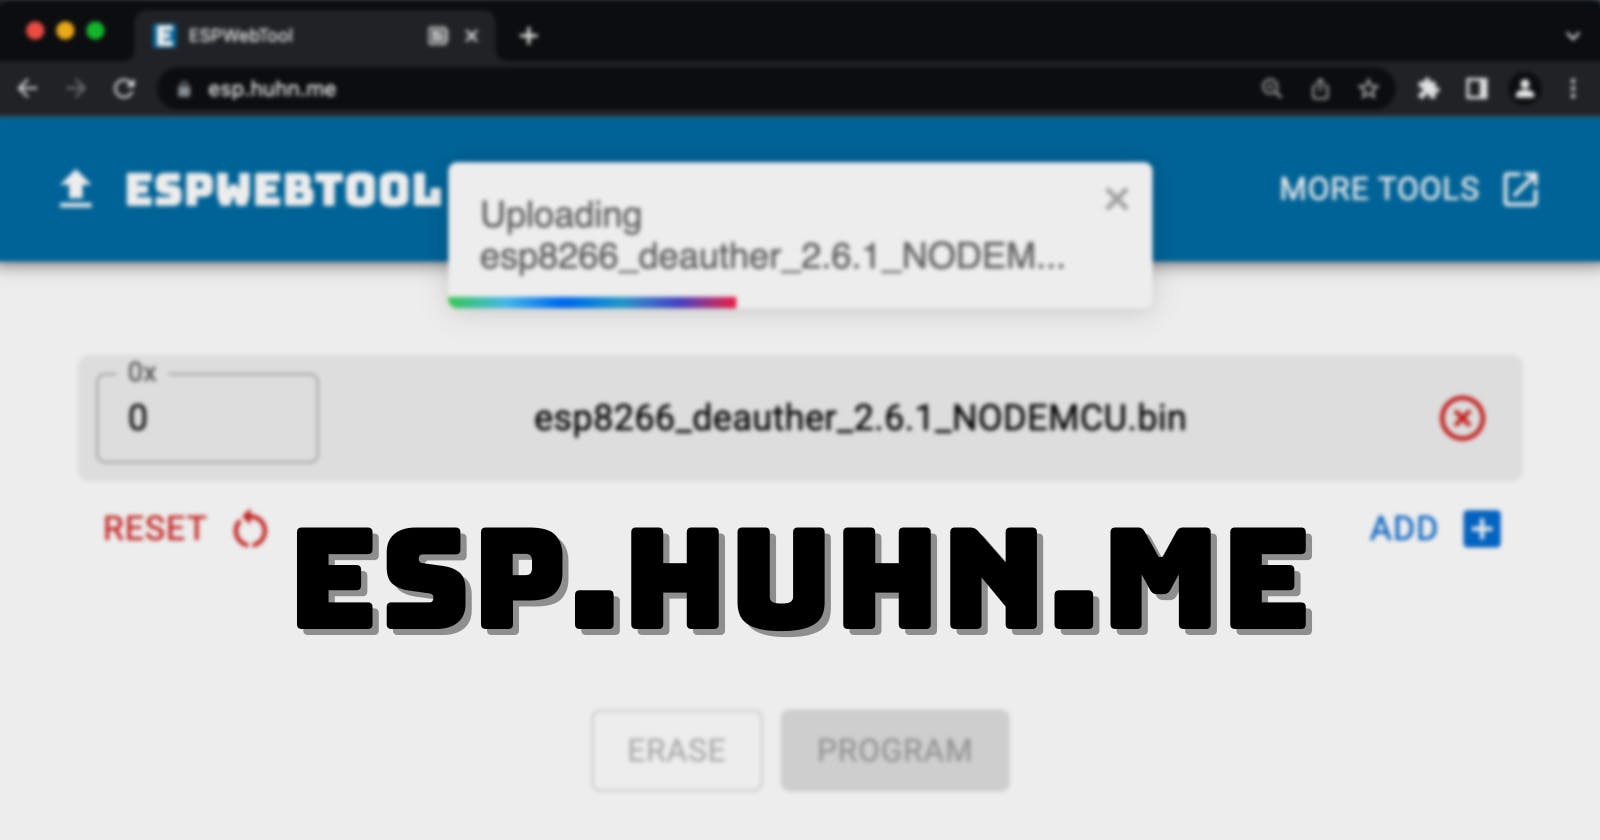 How to flash ESP32 or ESP8266 from your Browser